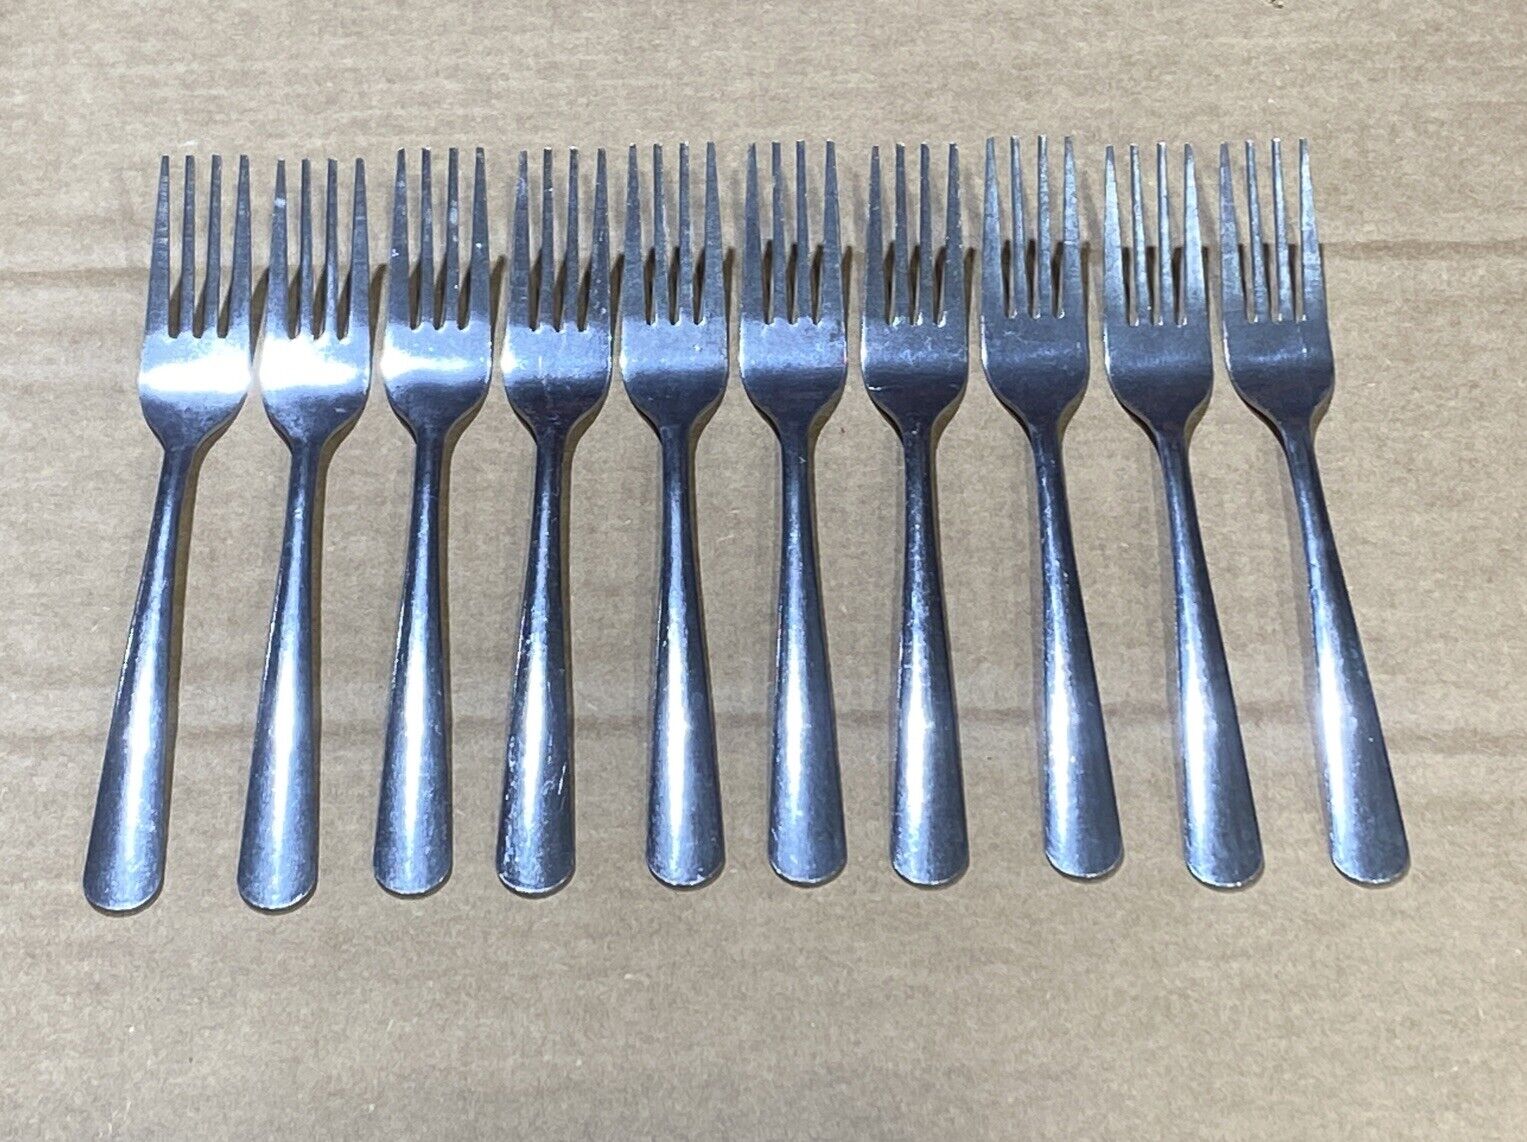 Qty.10 Vintage Sysco Stainless Steel 7” Dinner Fork Set 285 4516886 New